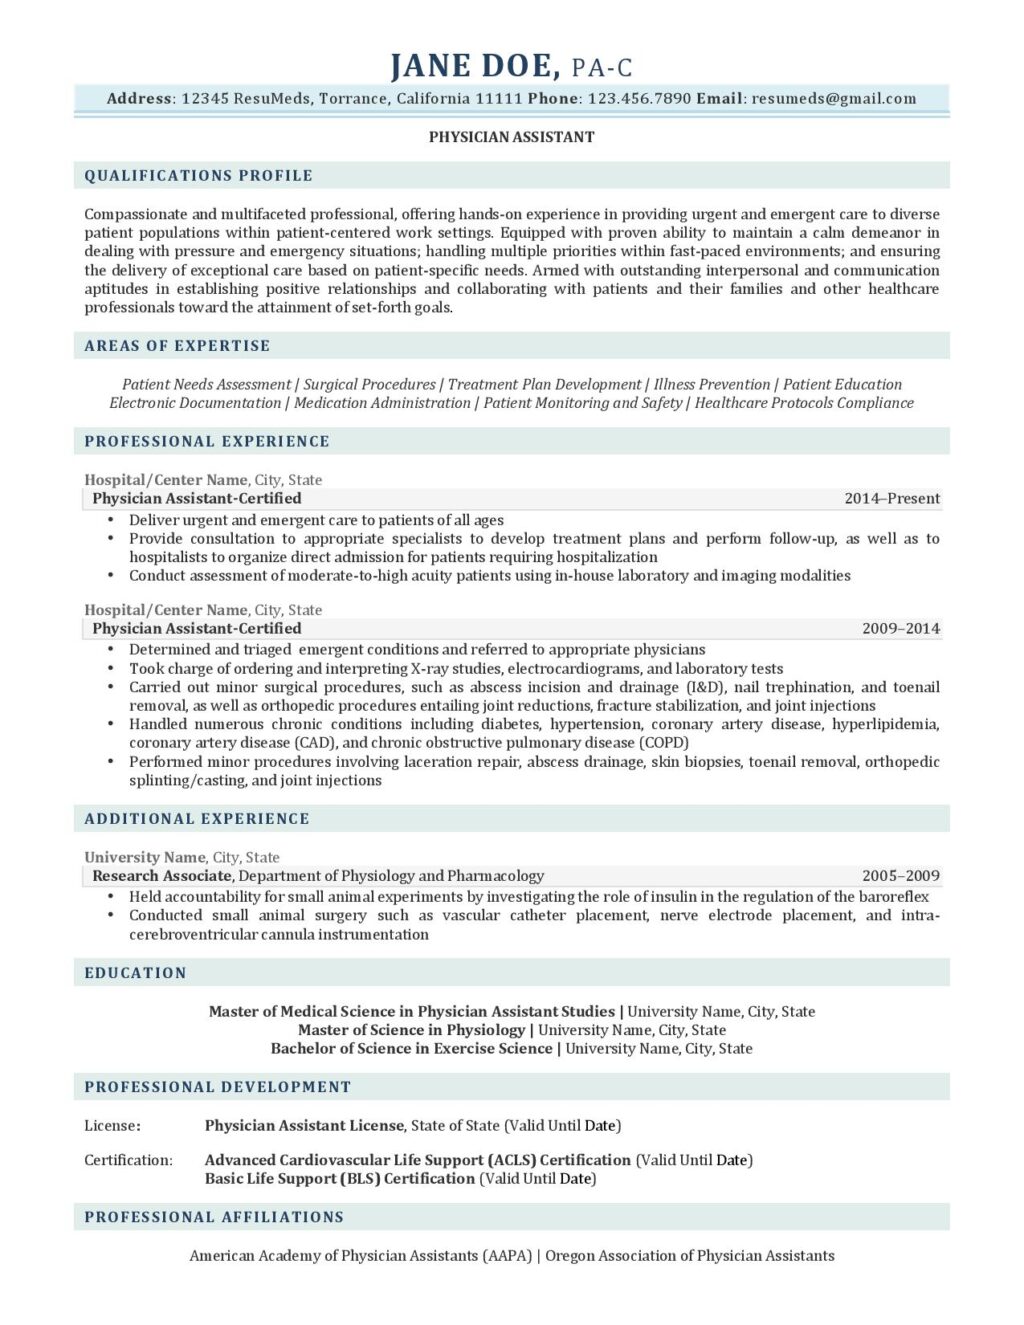 Physician assistant resume example prepared by ResuMeds